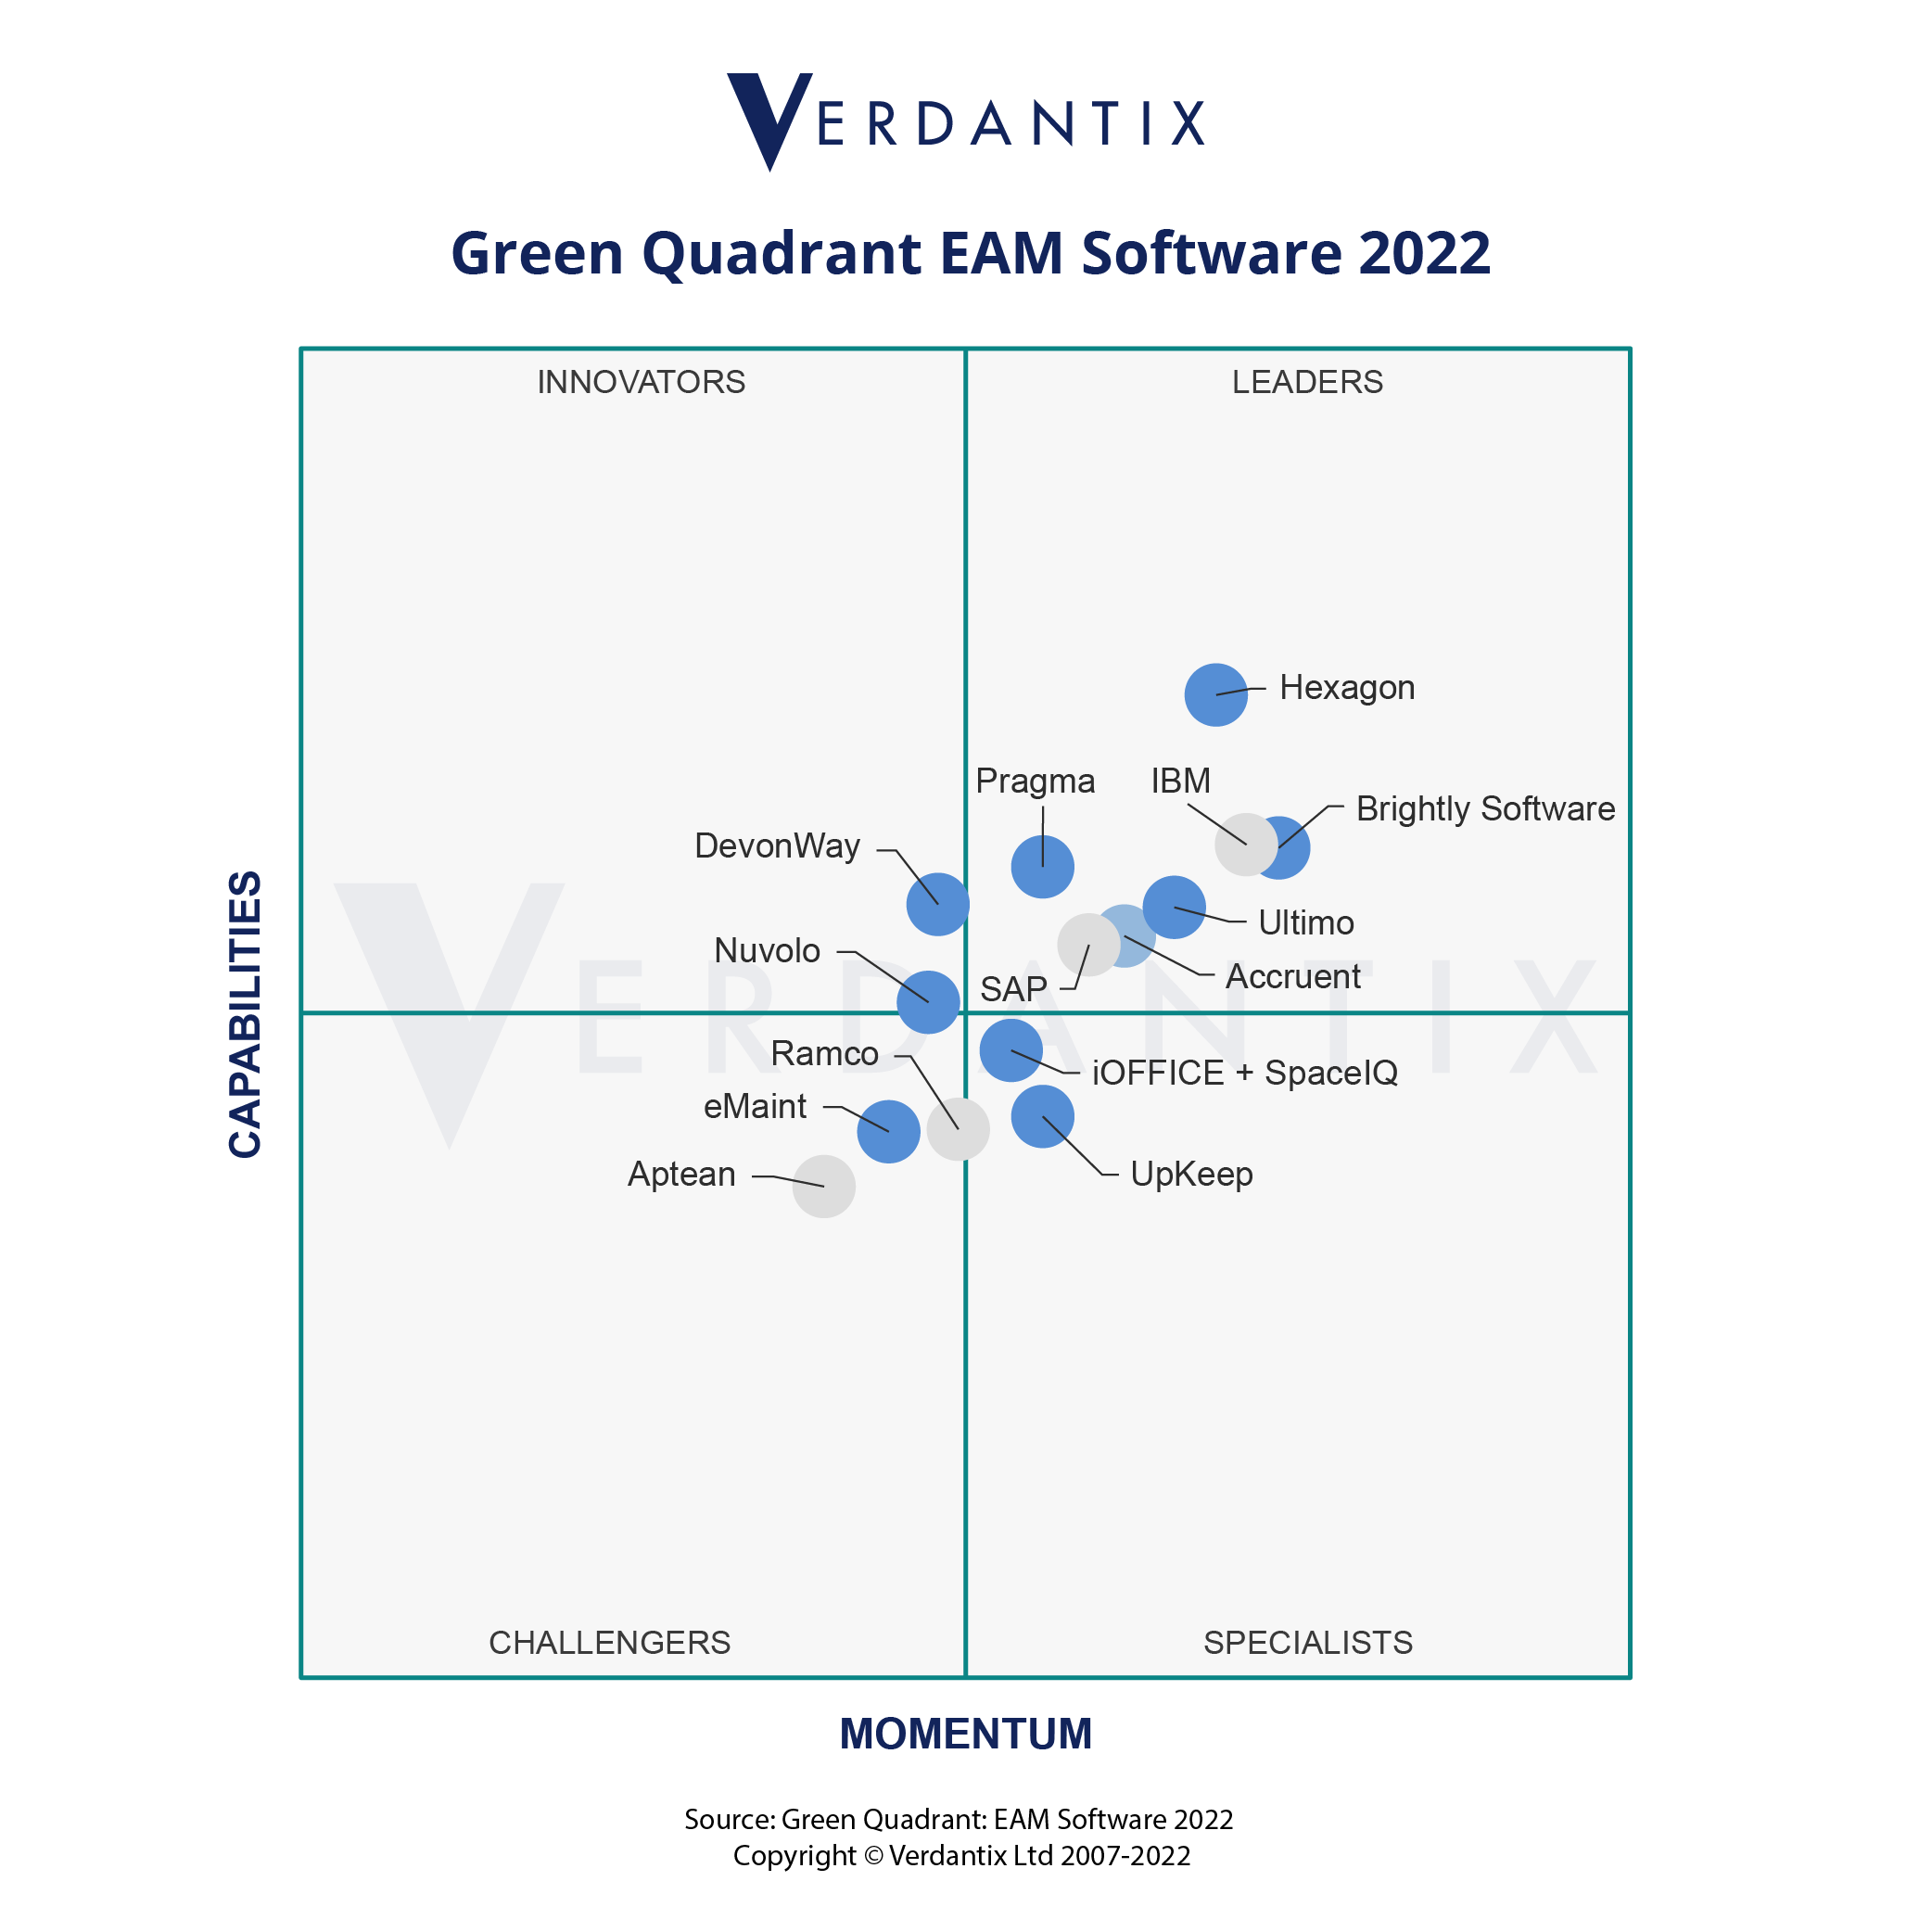 Verdantix Green Quadrant Benchmark Highlights Product Innovation Is Redefining The Well-Established EAM Software Market